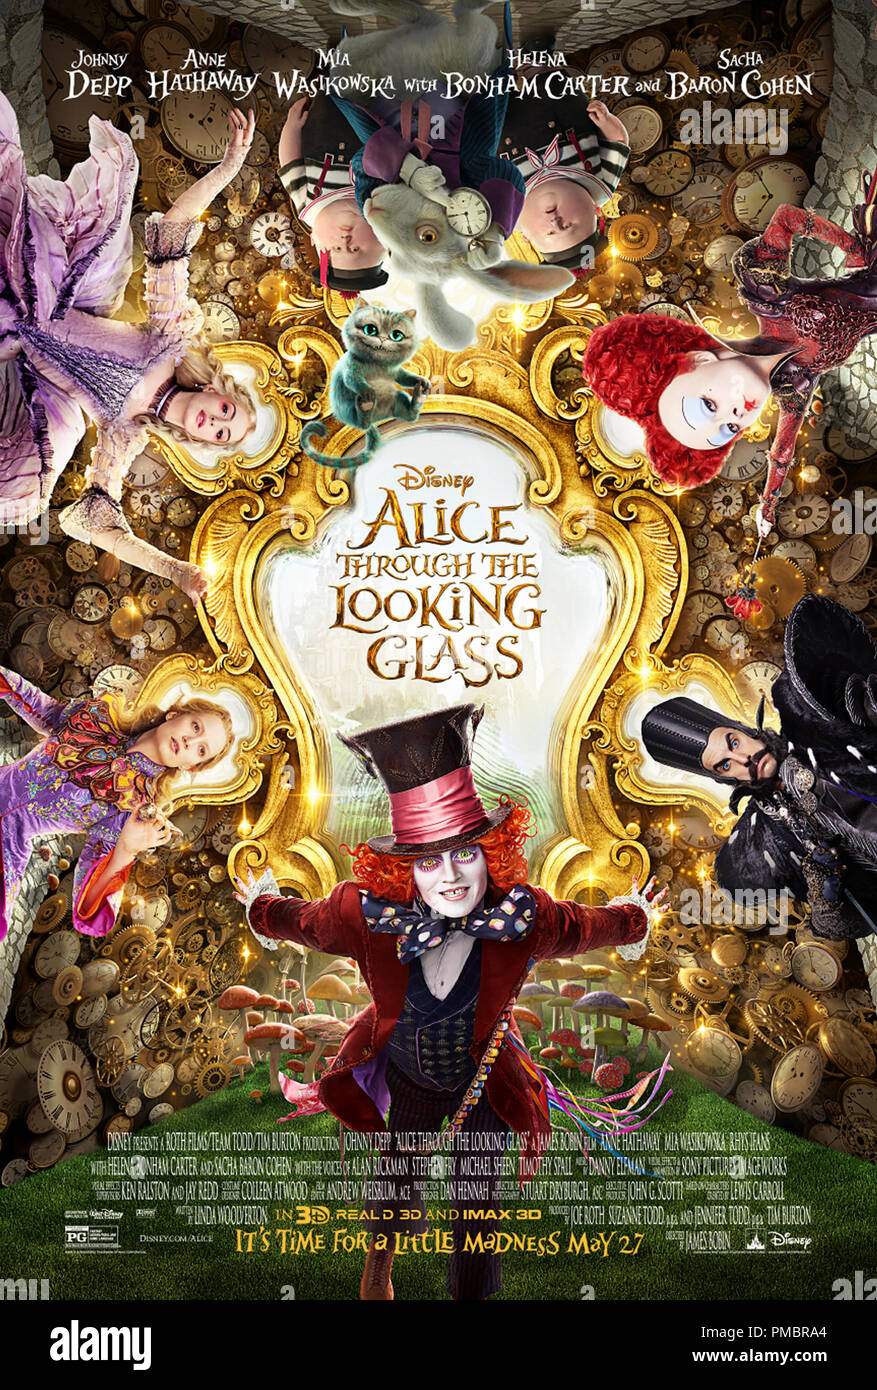 'Alice Through The Looking Glass' (2016) Poster  Mad Hatter (Johnny Depp) Stock Photo